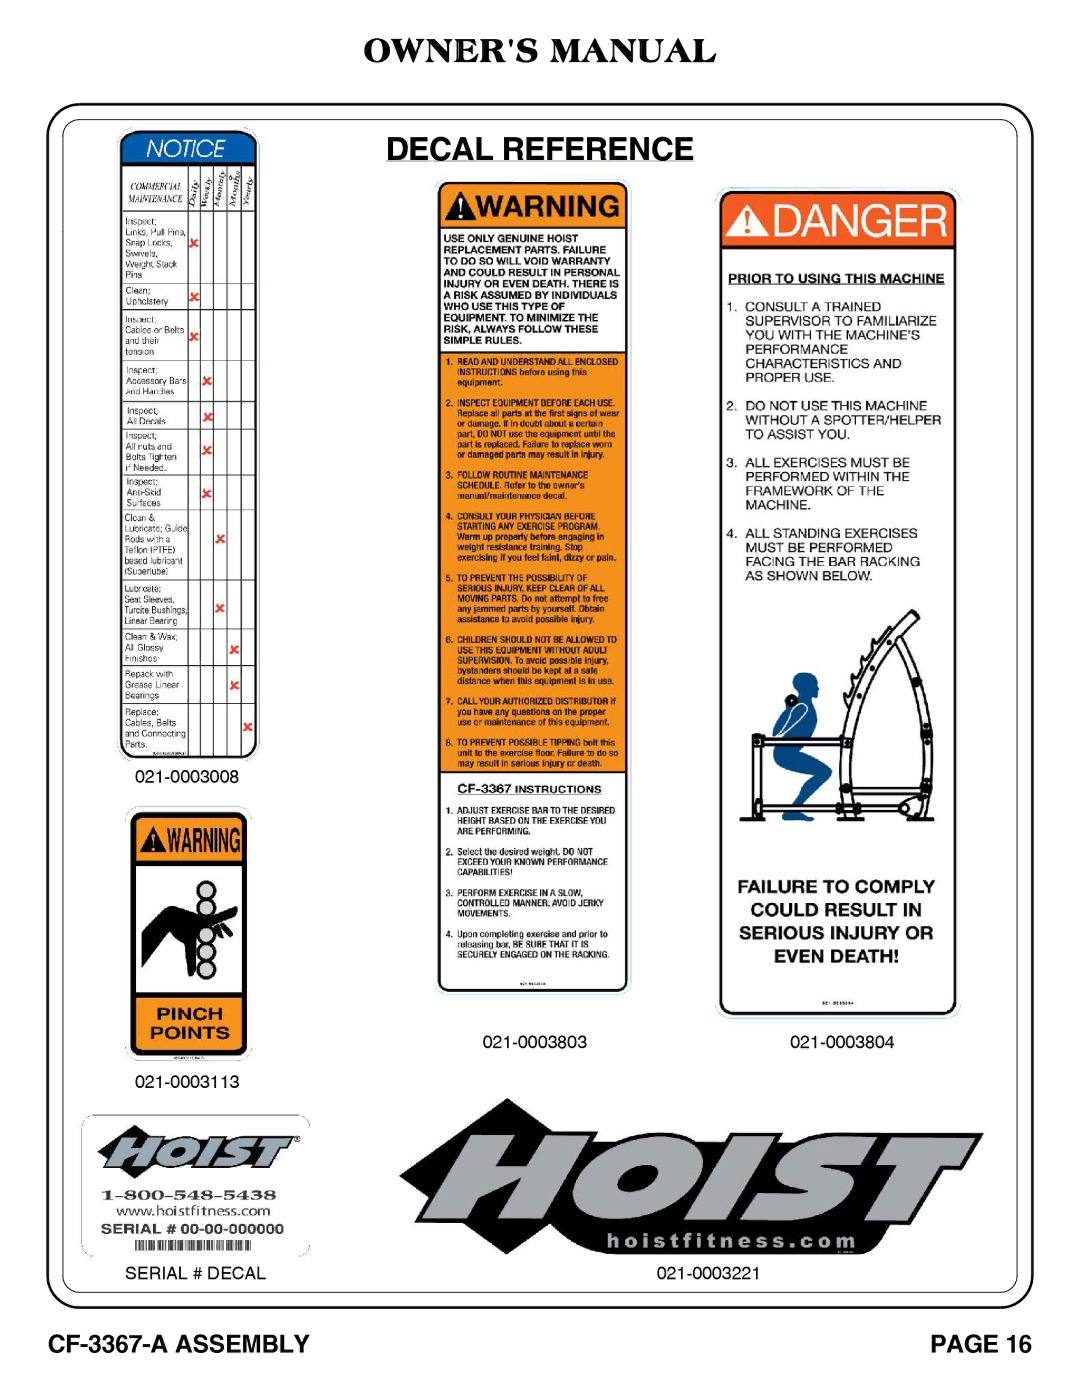 Hoist Fitness CF-3367-A SQUAT RACK owner manual Decal Reference 